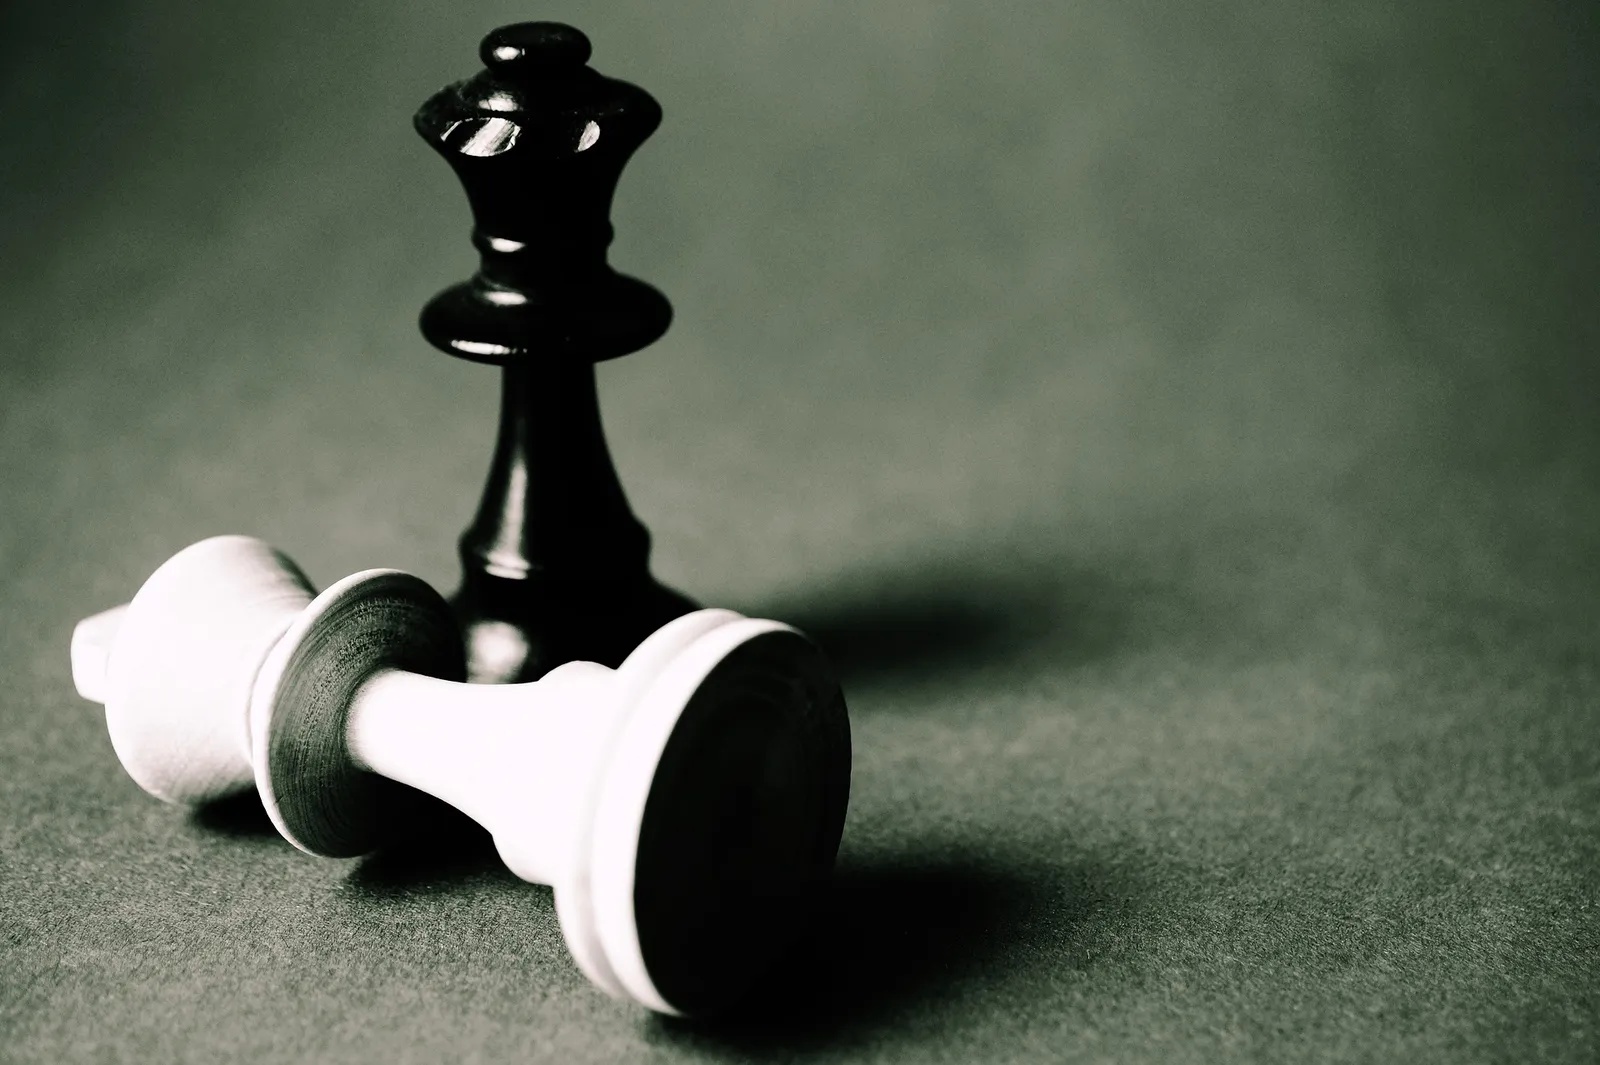 Improve Your Life by Playing a Game - British Chess News